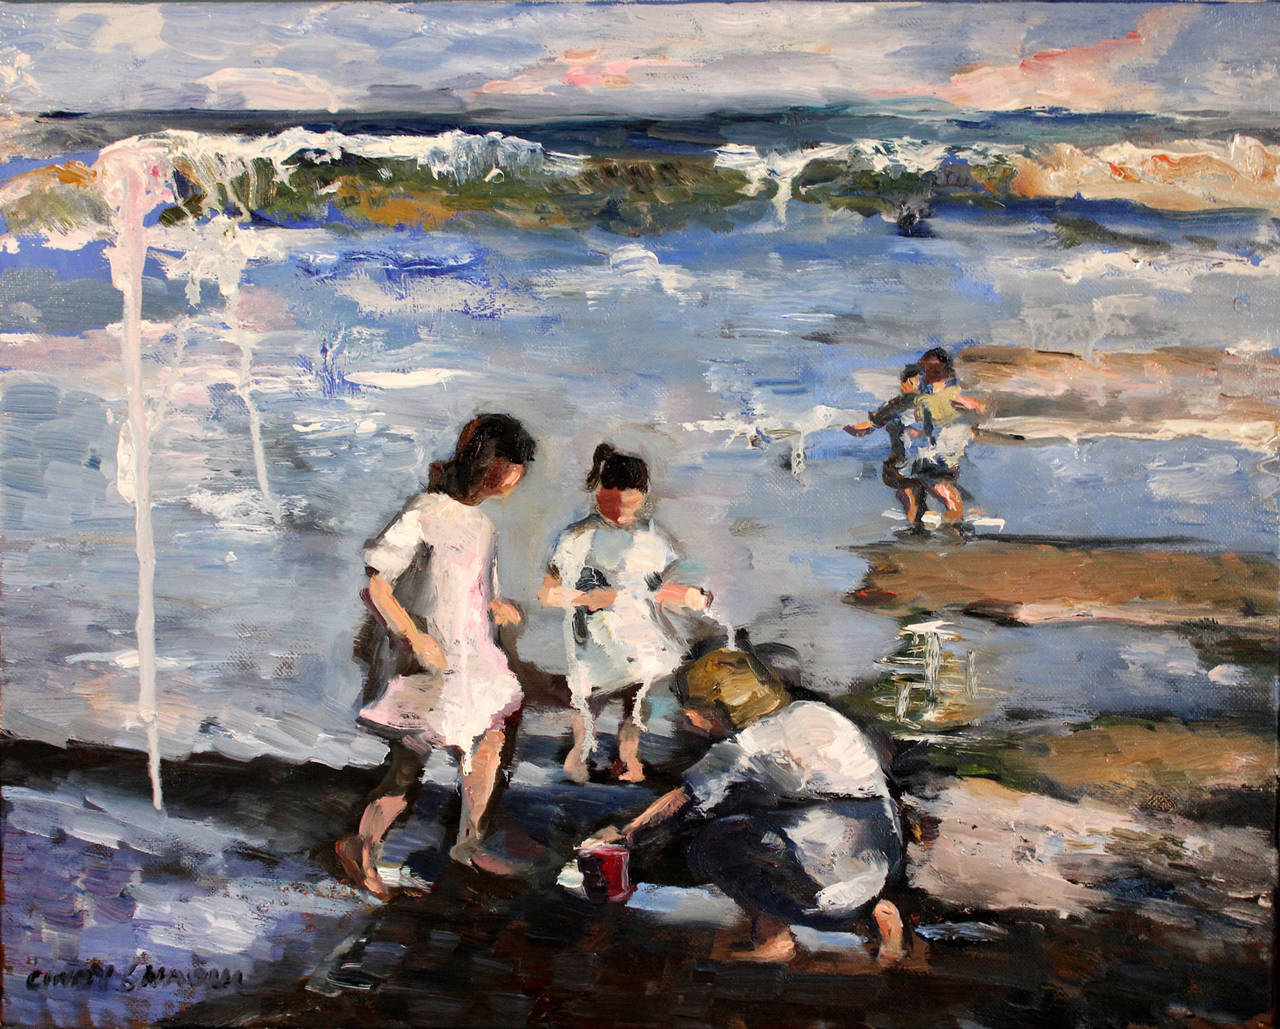 Cindy Shaoul Figurative Painting - "Kids at the Beach" Impressionist Beach Scene Oil Painting Style of Potthast